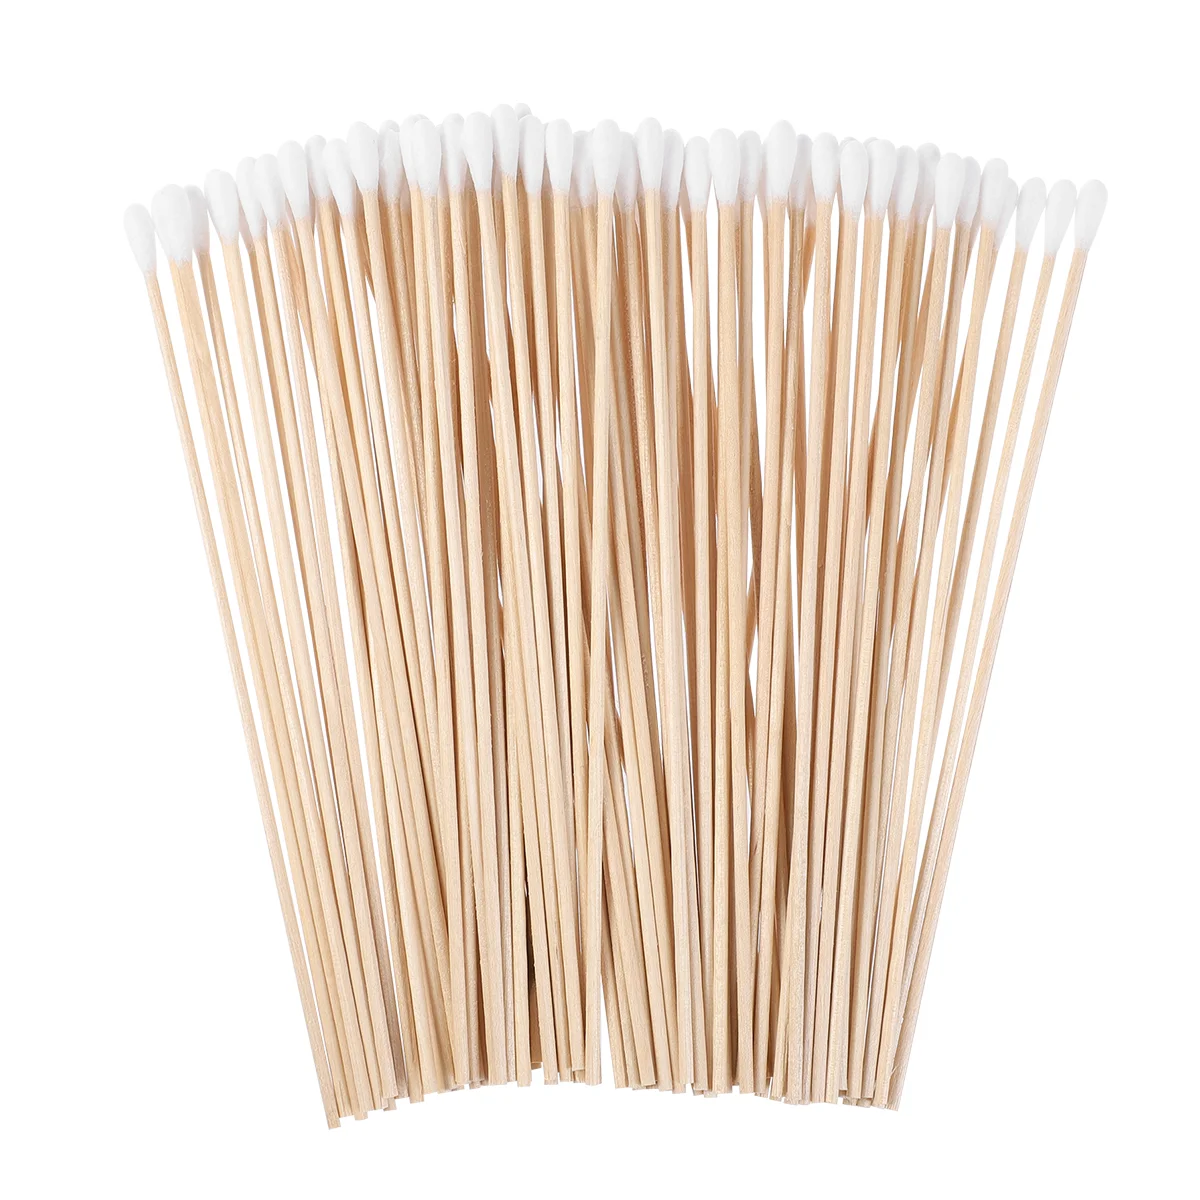 

Cotton Swabs Sticks Applicator Tip Buds Swab Tool Makeup Handle Cleaning Ear Wood Pointed Tipped Wooden Swad